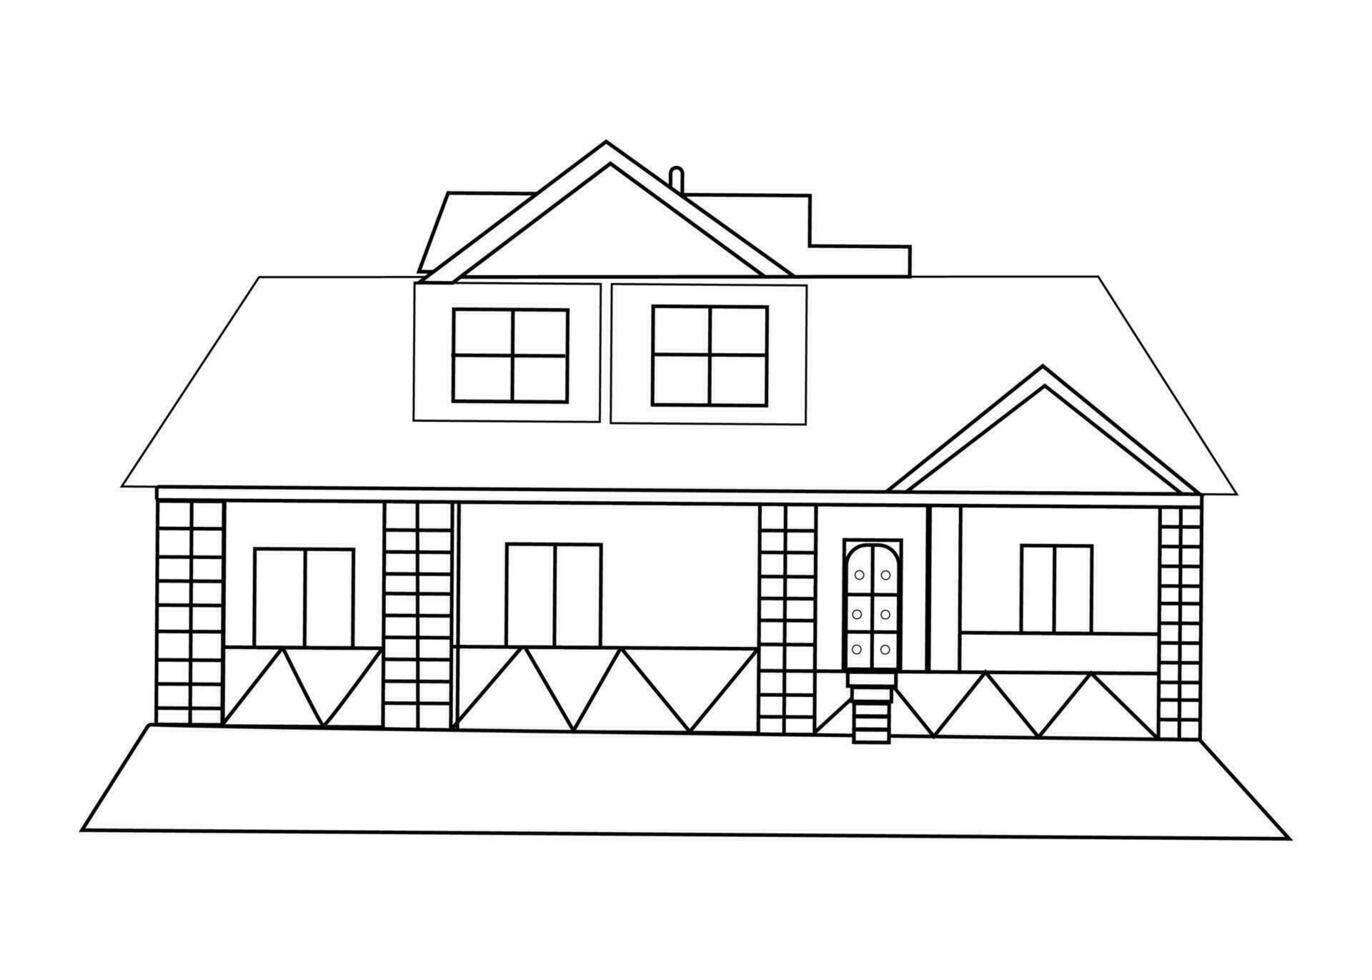 House Vector, House Coloring Pages for Kids. Coloring book for children and adults. Black and white illustration of a house. Contour figure of the cottage. vector